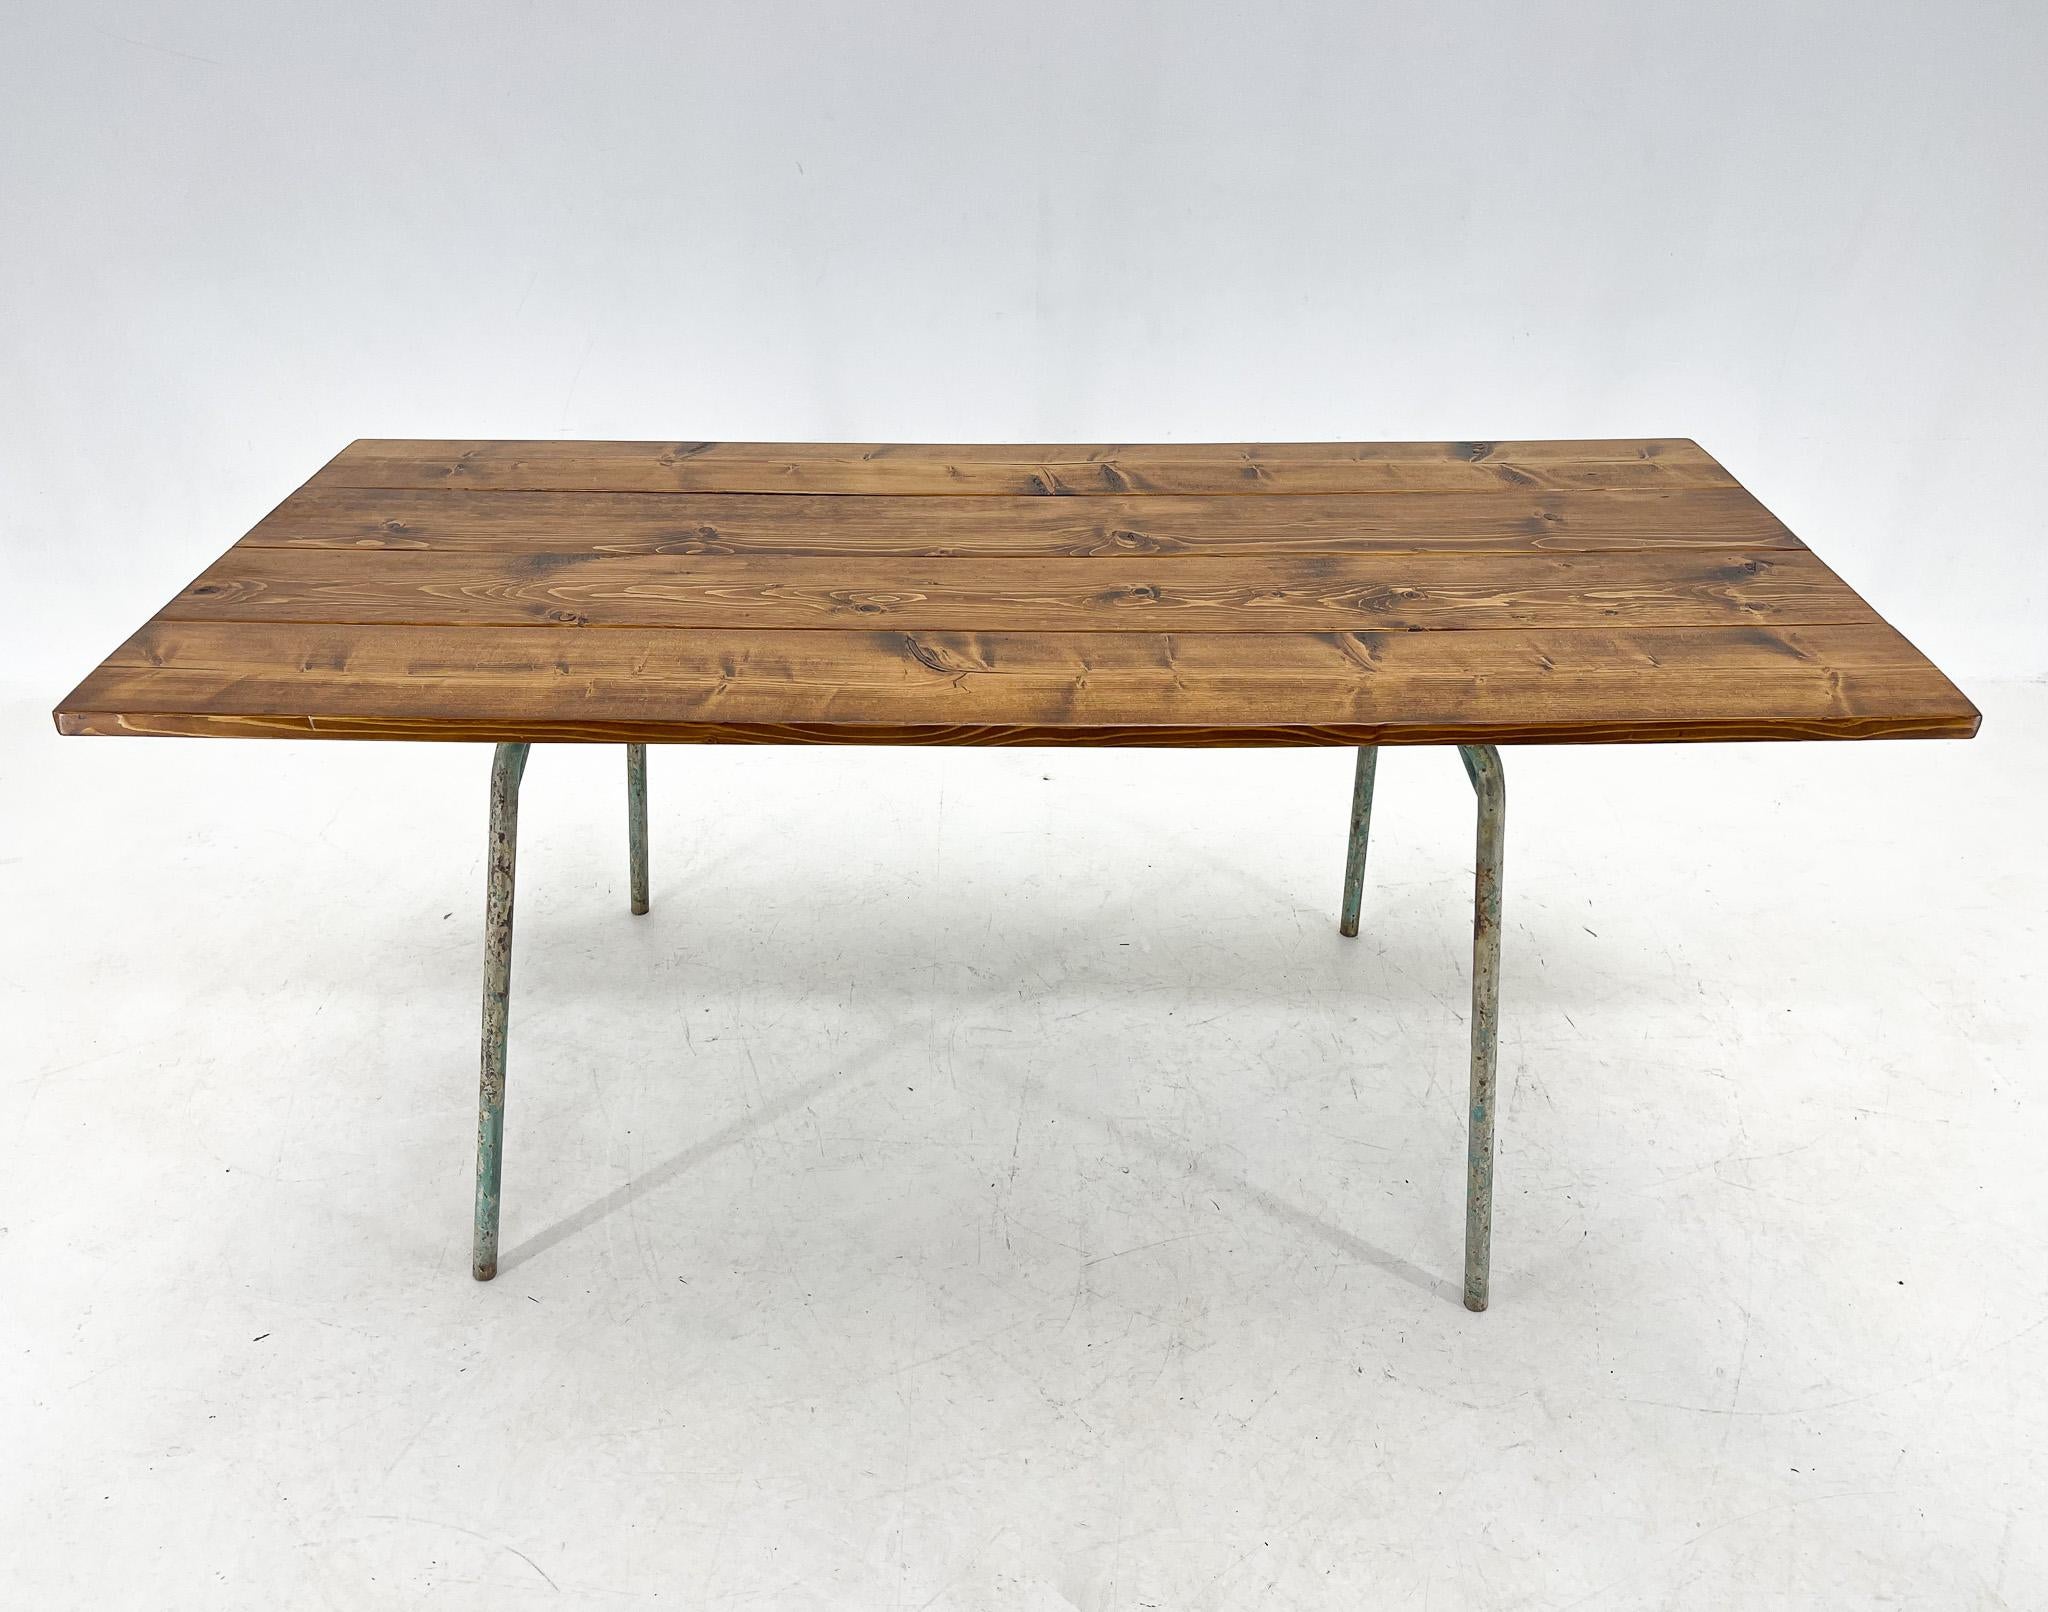 Beautifully time-patinated metal legs with a recycled wood top treated with special oil.